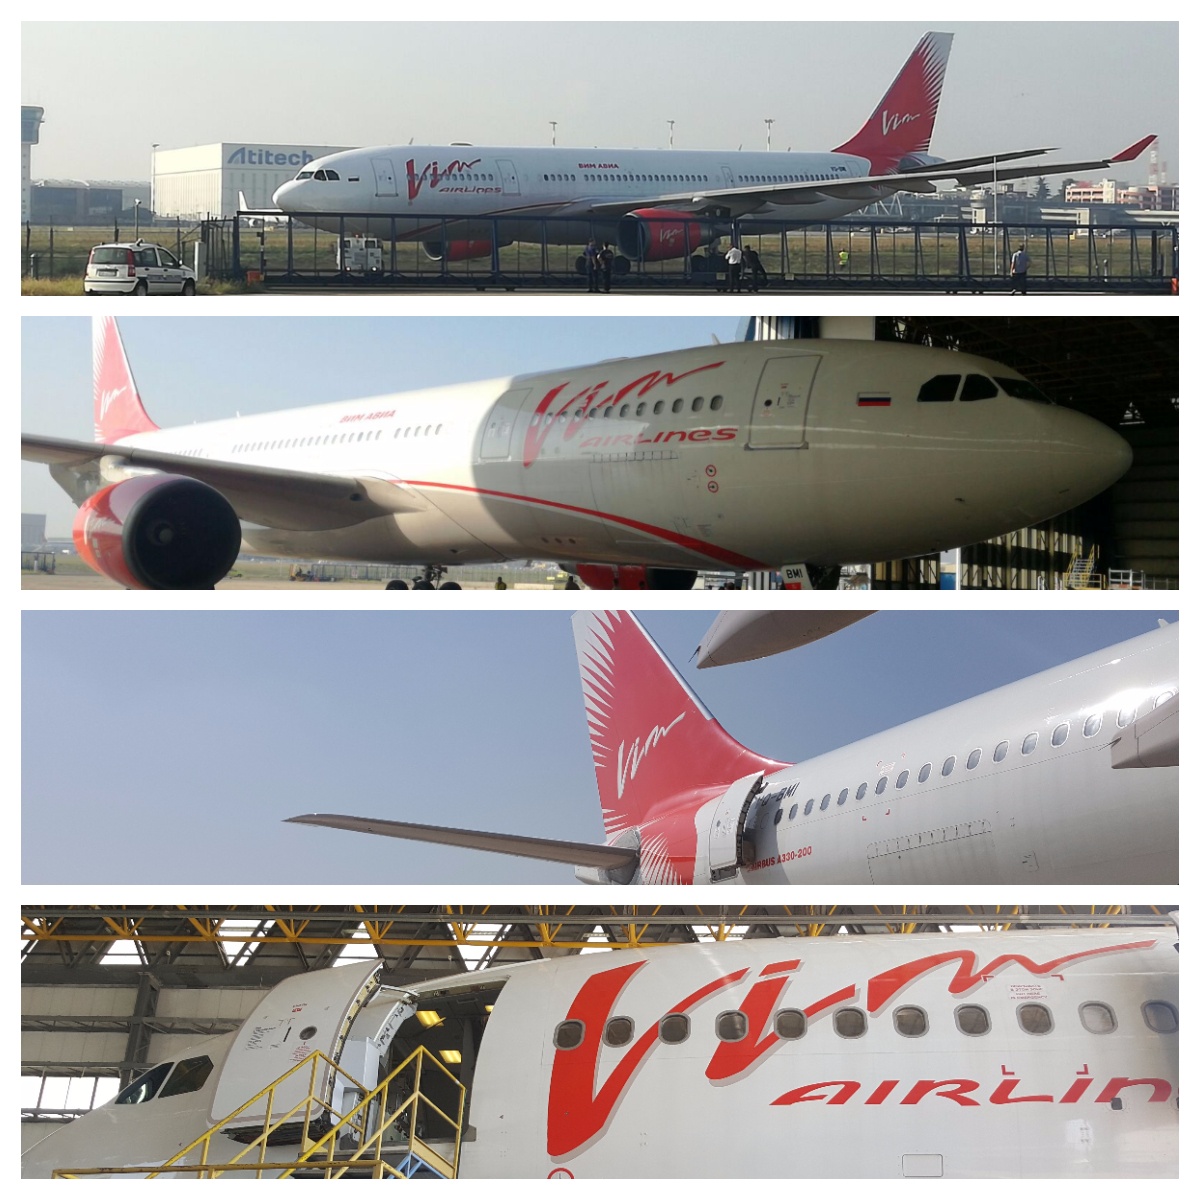 VIM Airline choses Atitech to renovate its A330 cabin